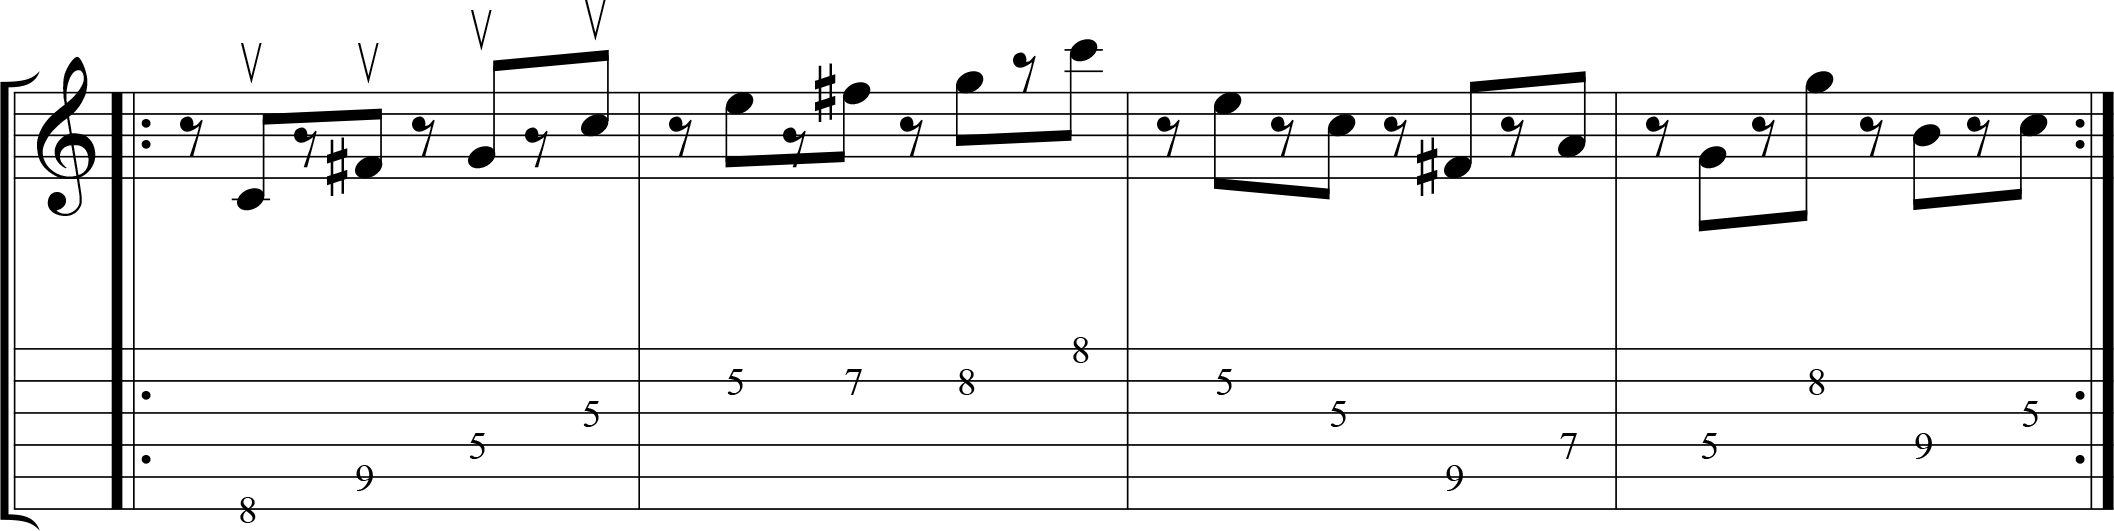 Up-picking exercise in a contemporary musical style.